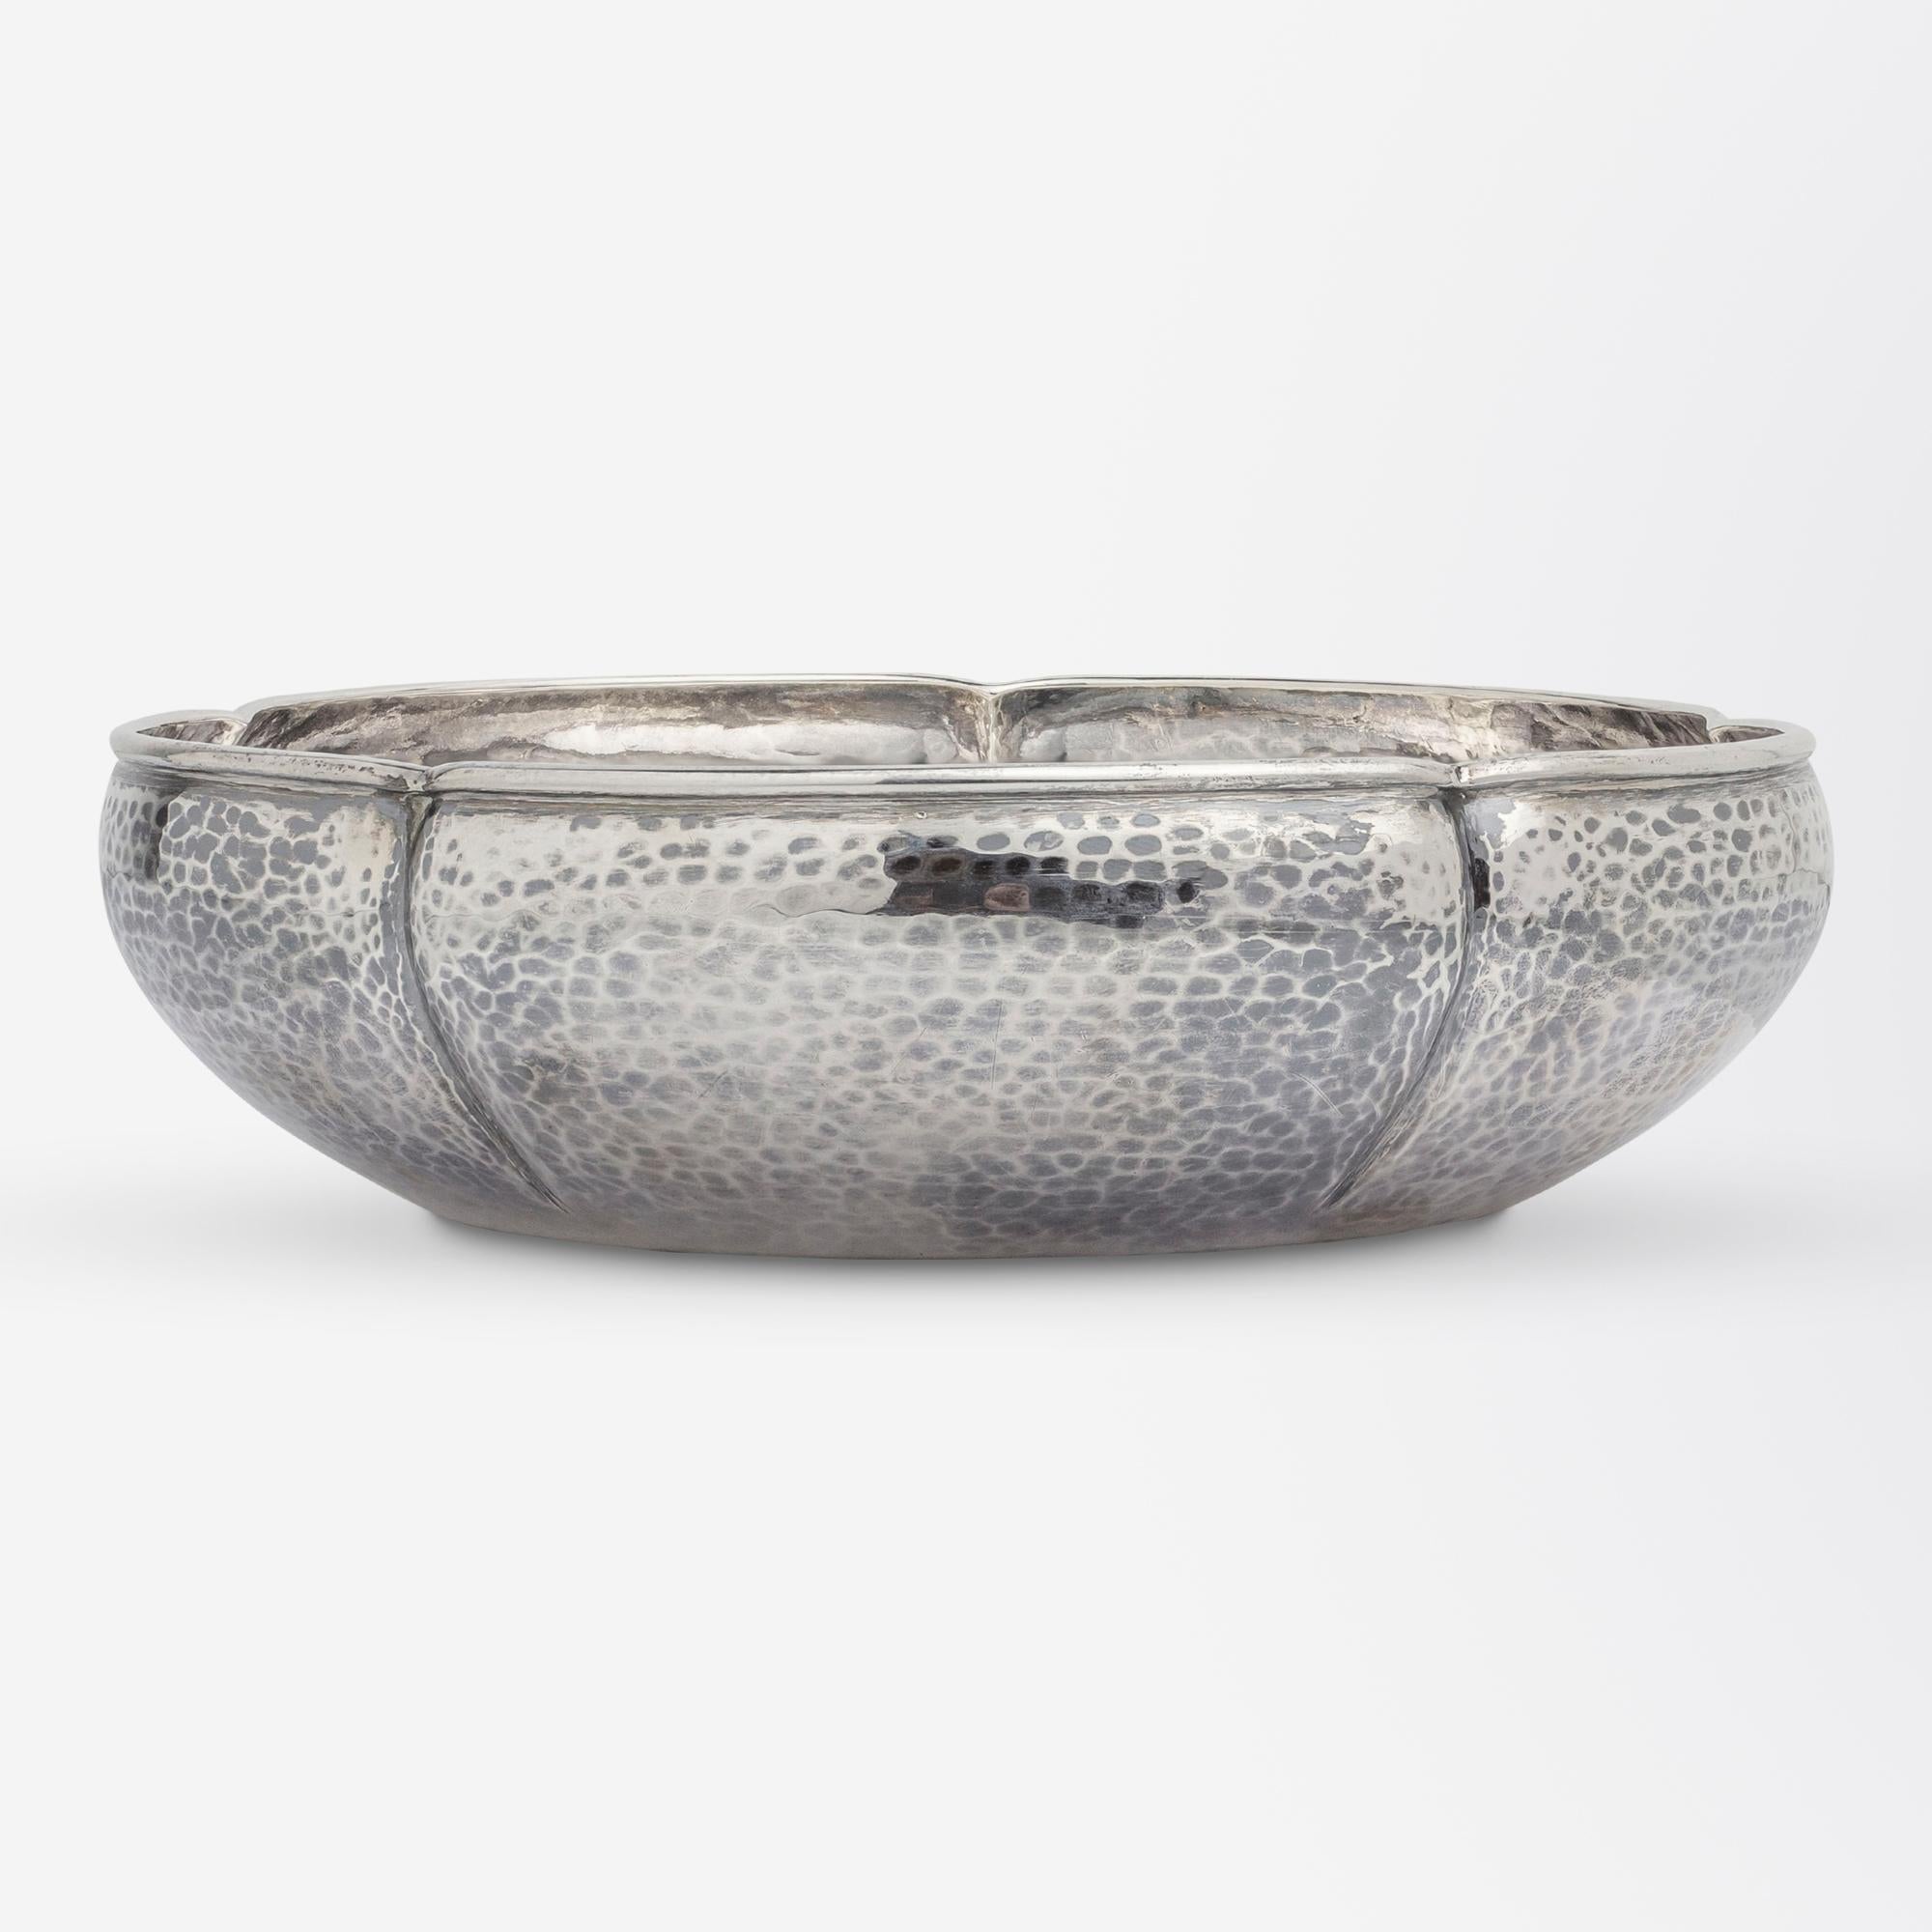 This hand hammered sterling silver bowl by was made by Chicago firm 'The Kalo Shop'. Completely hand wrought the piece is in the American Arts and Crafts taste of the early 20th Century and features distinctive signs of hand hammering by the